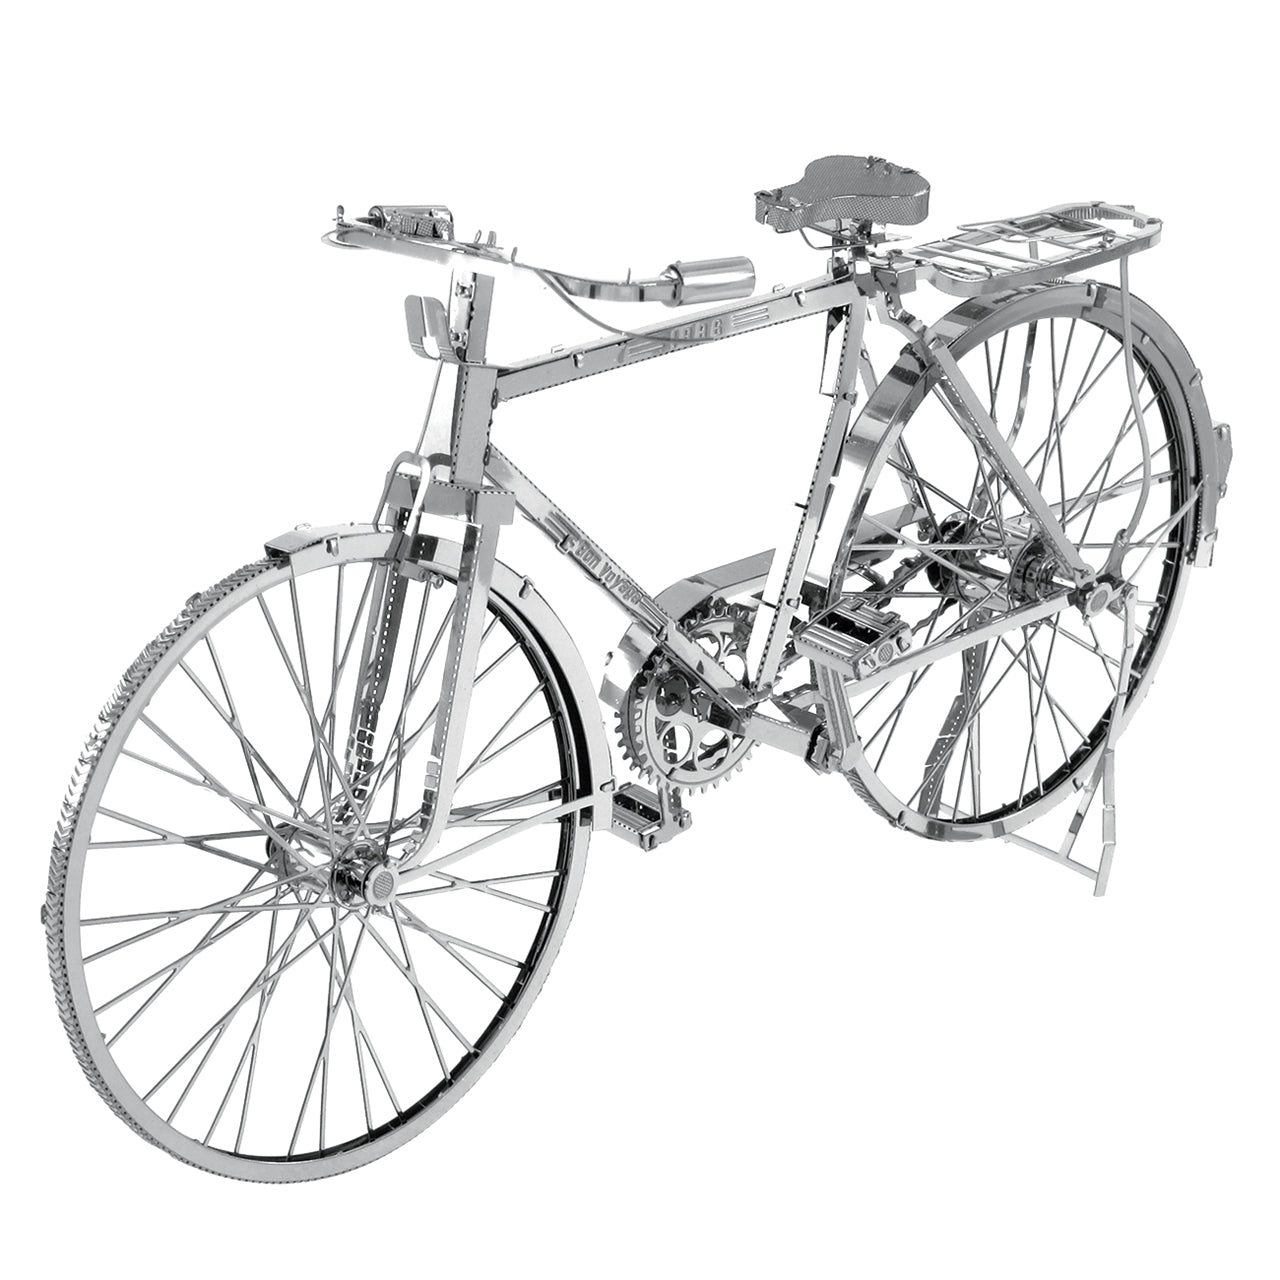 ICX020 Classic Bicycle (Buildable) (Discontinued Model)